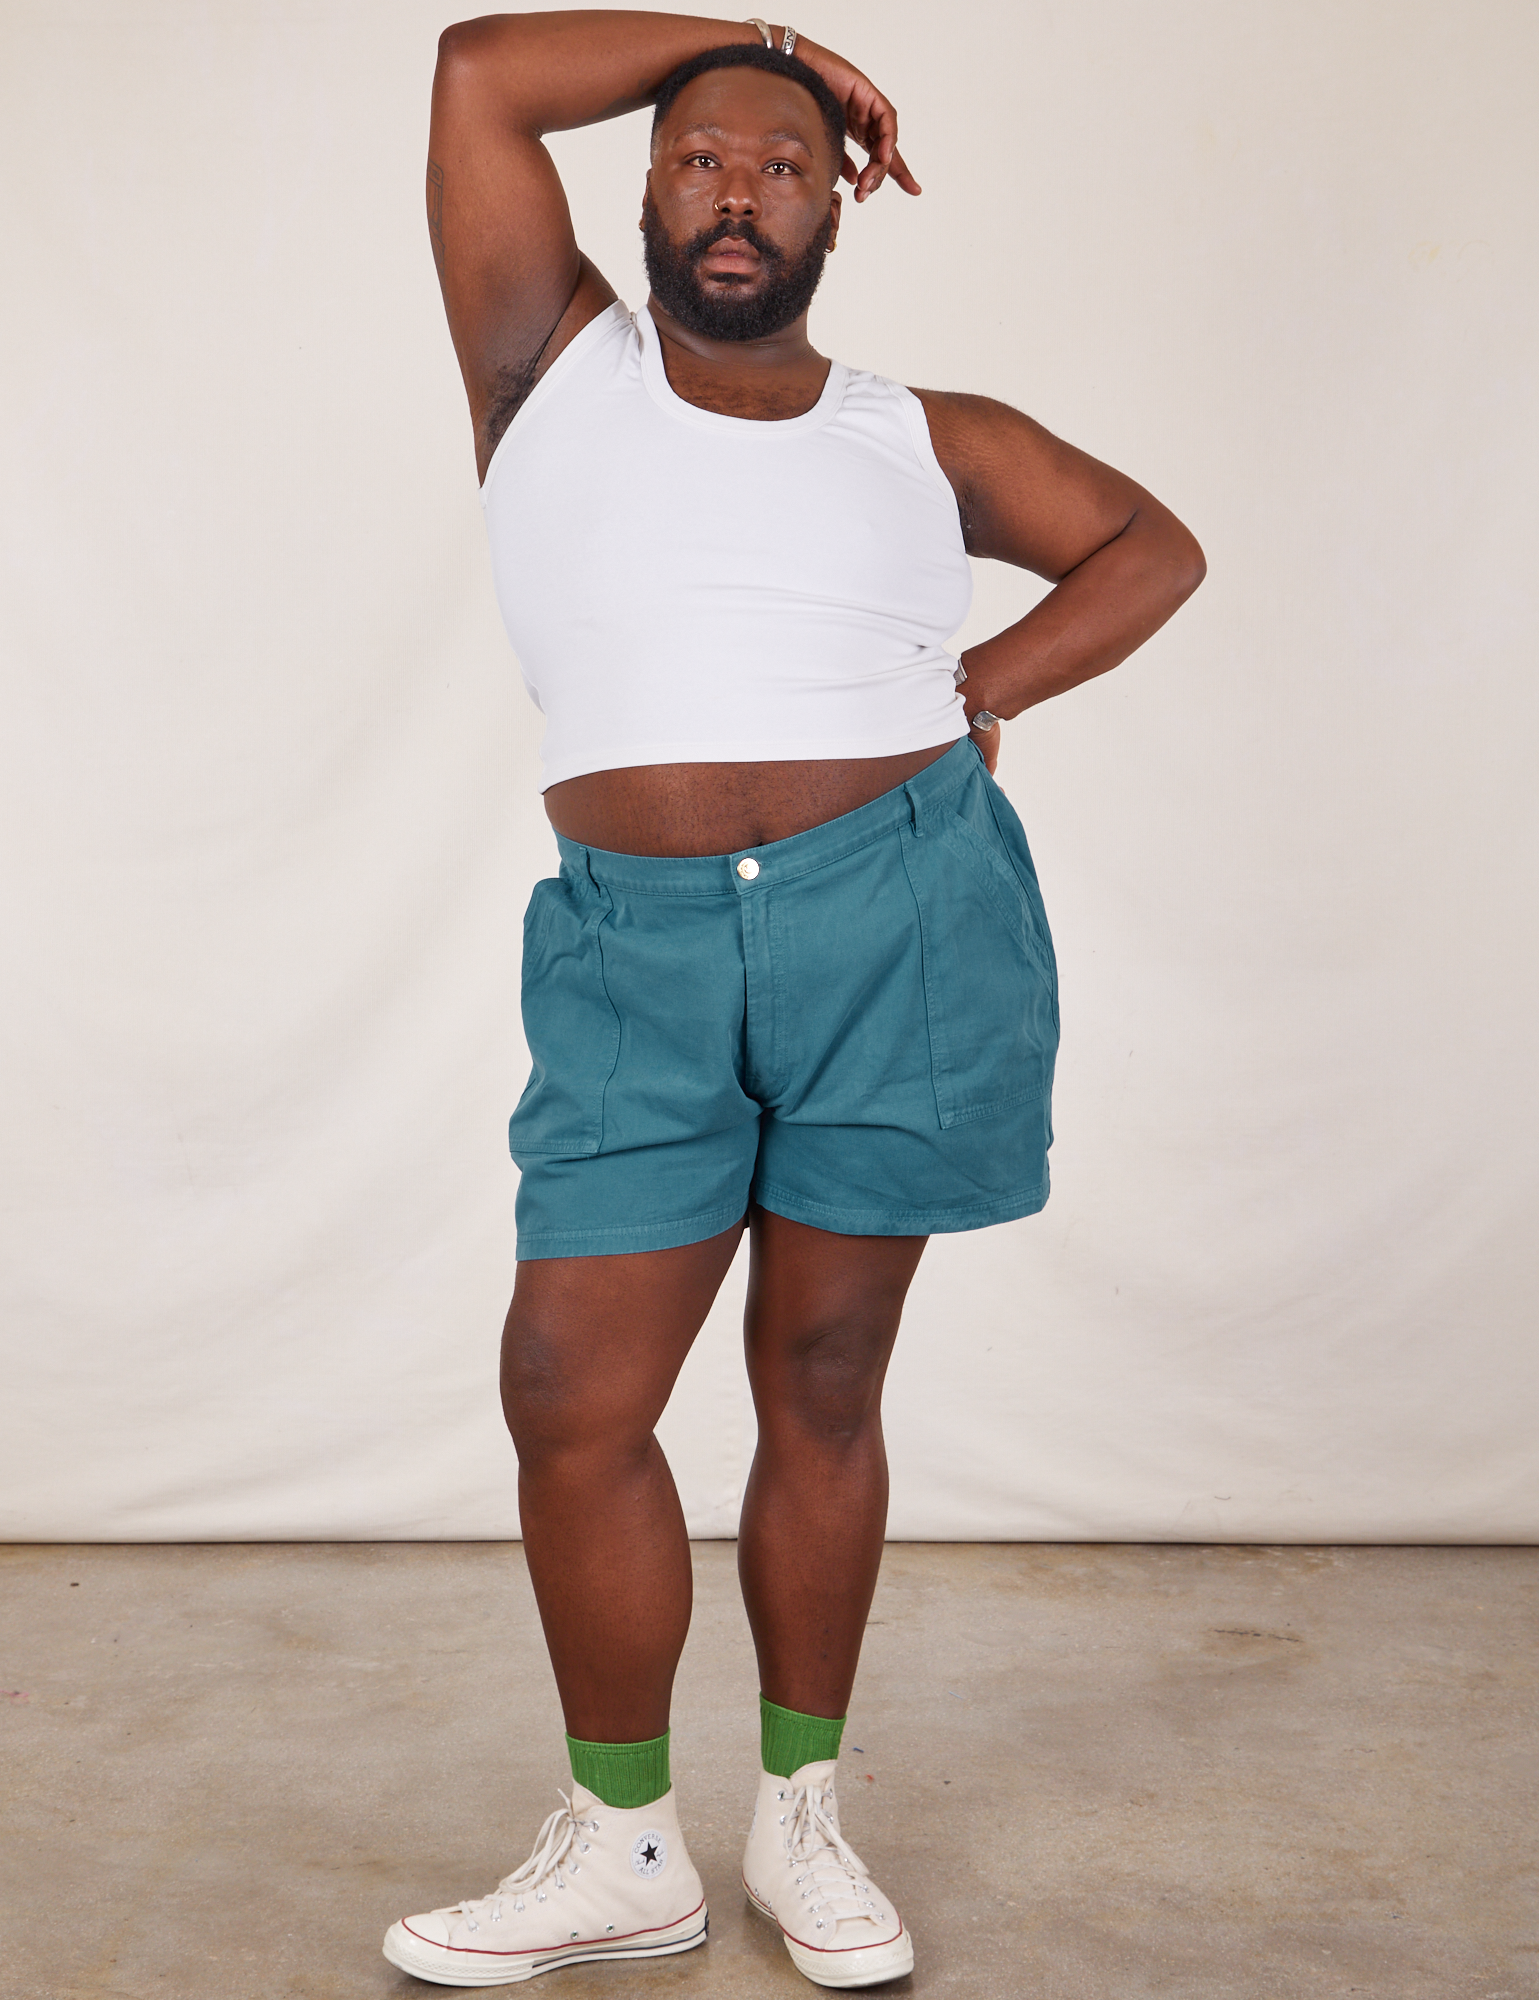 Elijah is 6’0” and wearing 3XL Classic Work Shorts in Marine Blue paired with a Tank Top in vintage tee off-white